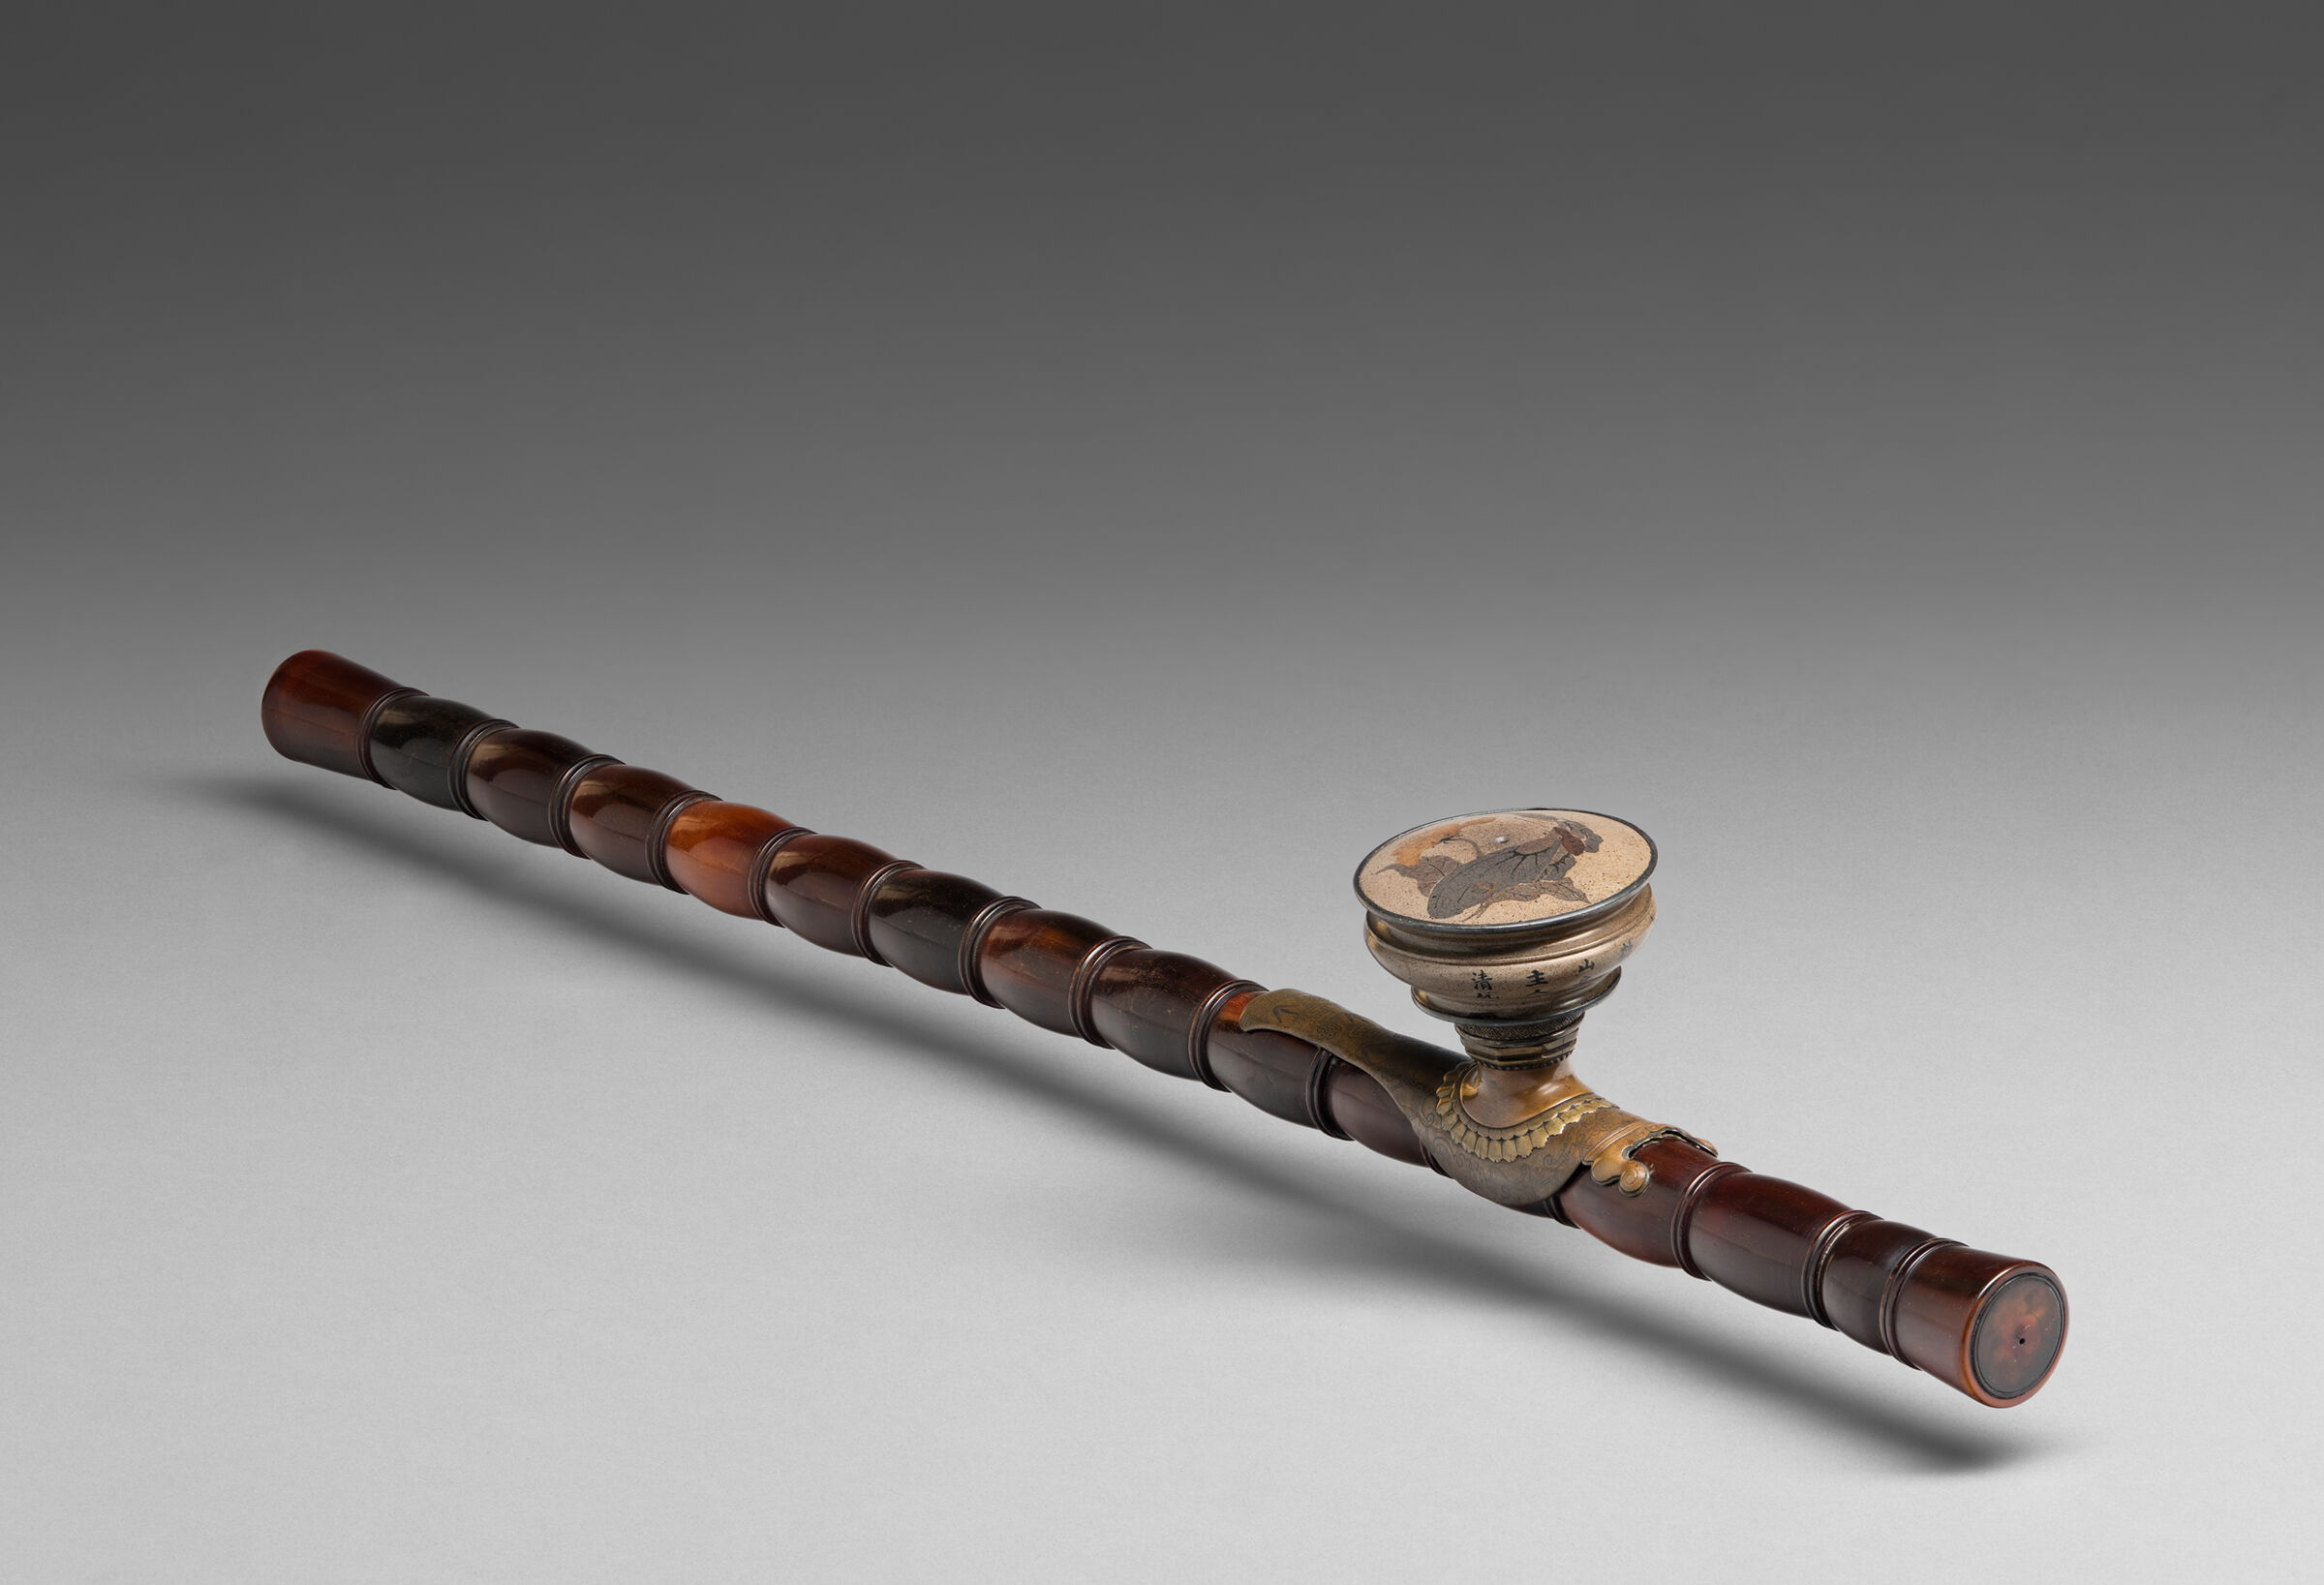 A brown opium pipe features a ceramic bowl decorated with a butterfly and poppy flowers.